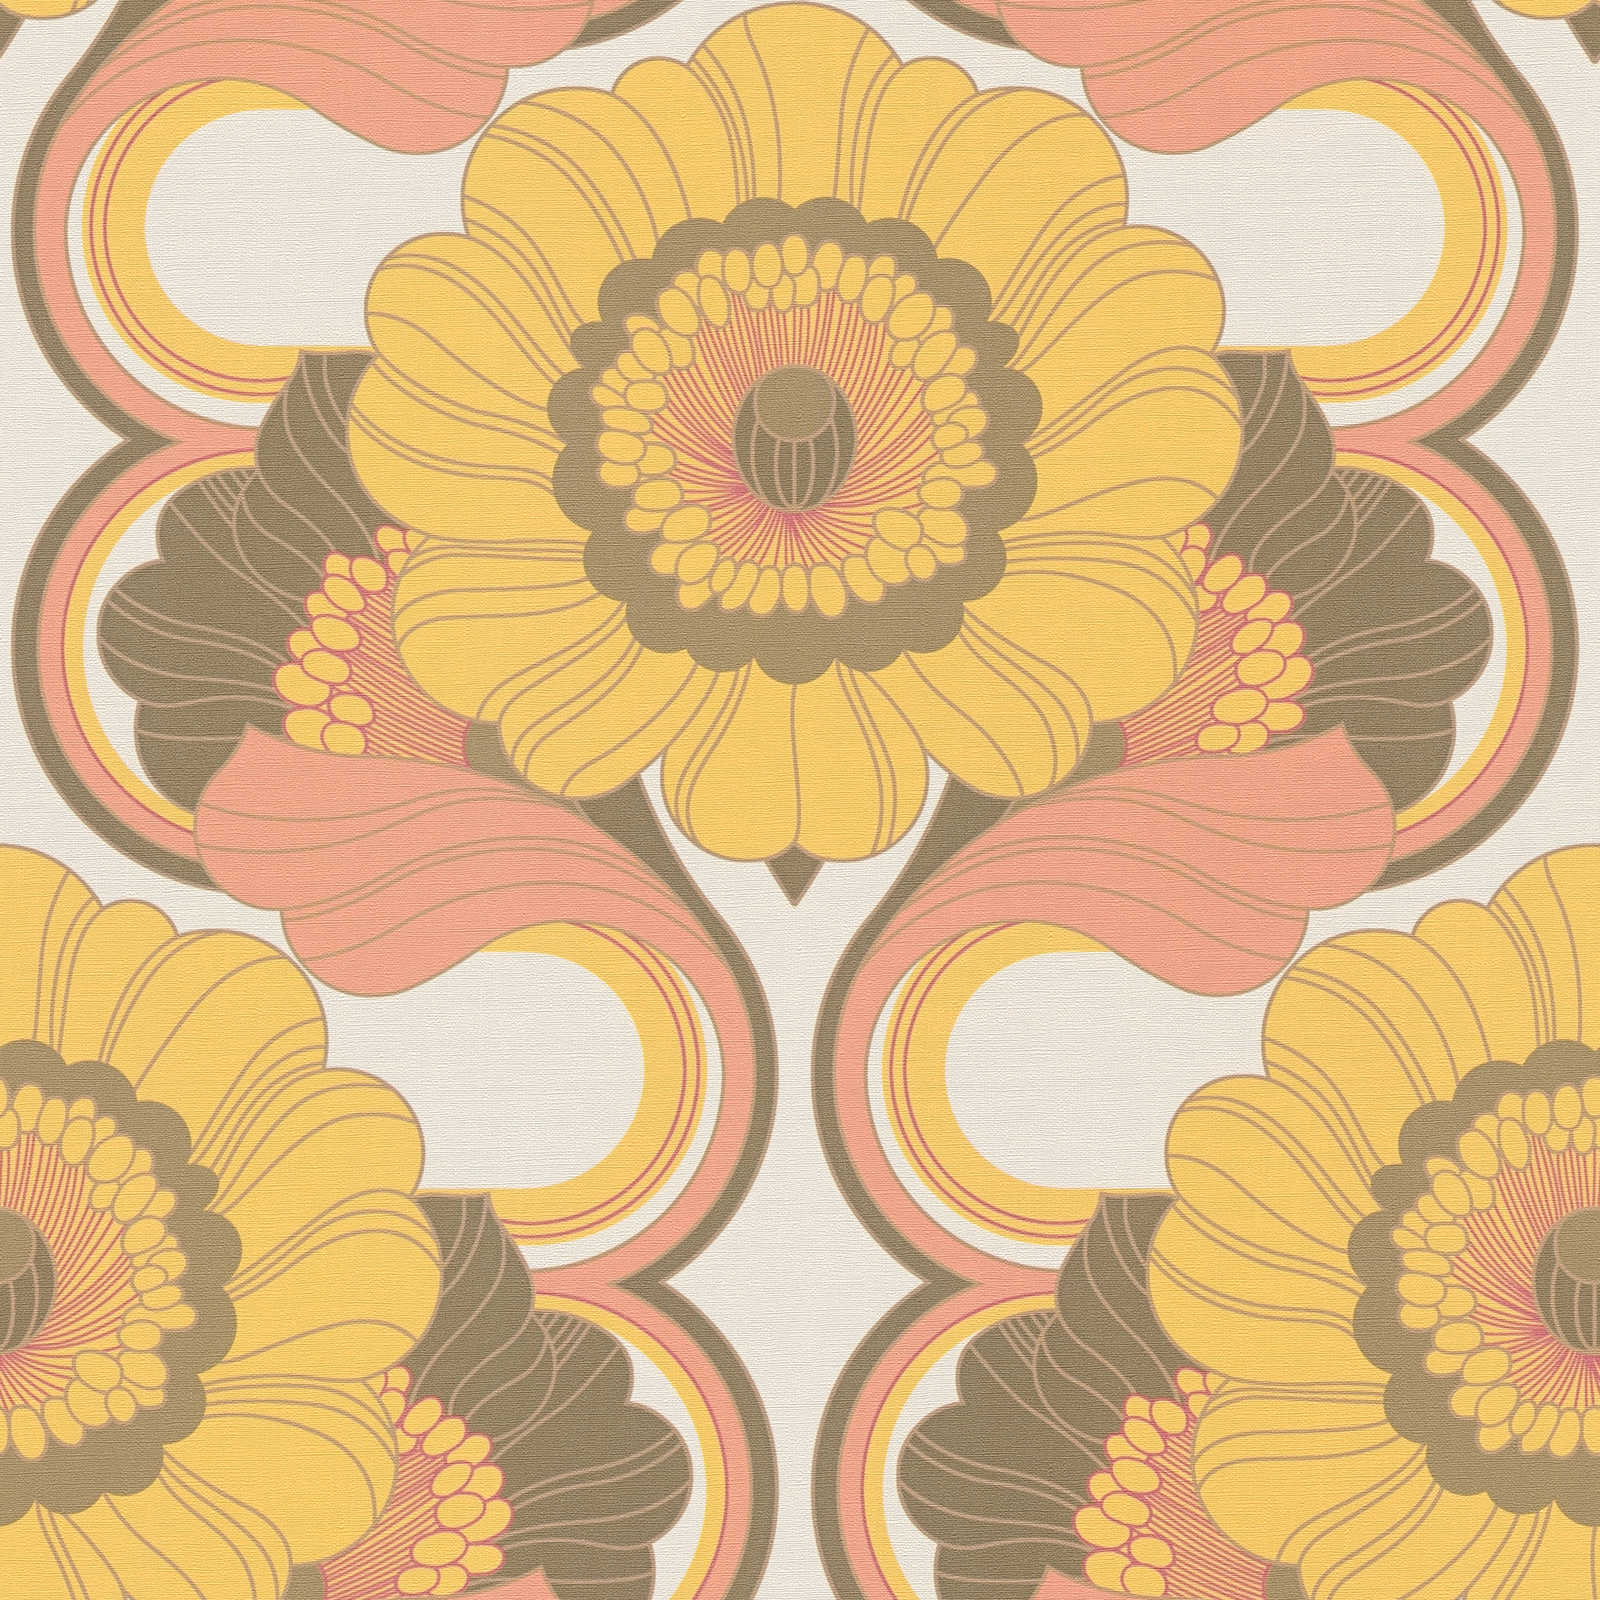 Floral retro wallpaper with floral pattern in warm colours - brown, yellow, orange
